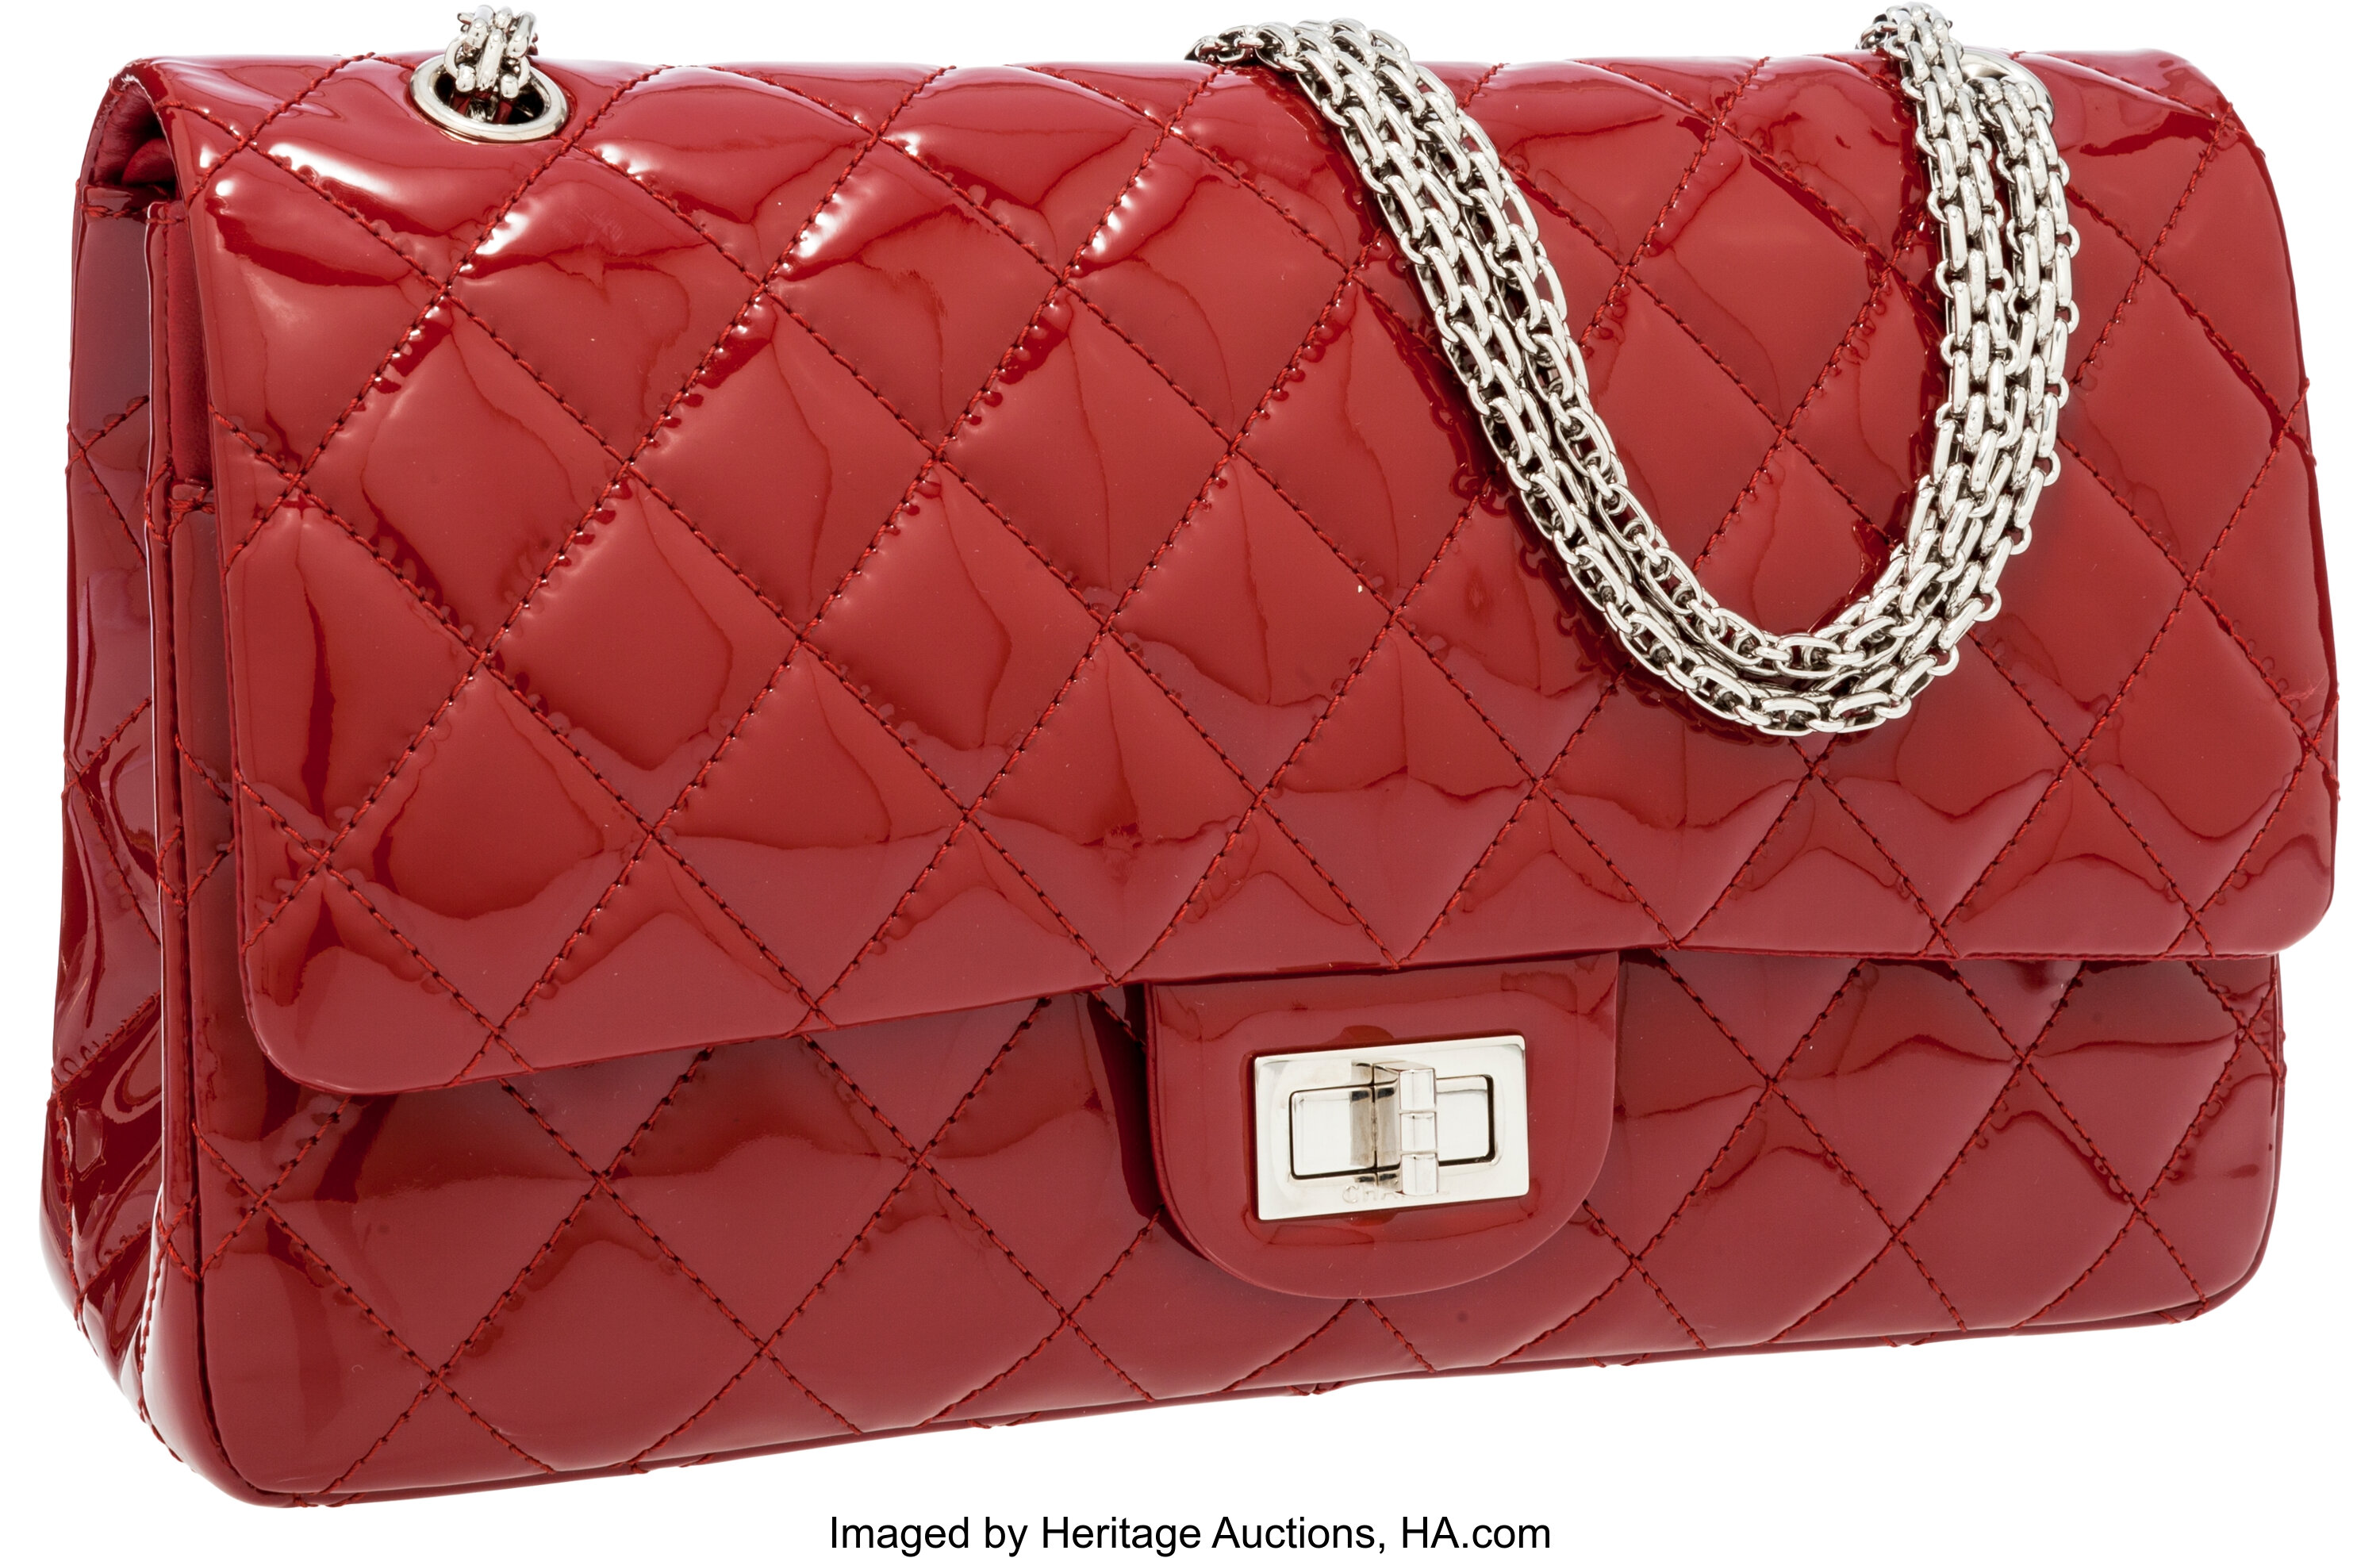 Chanel Candy-Apple Red Patent Leather 2.55 Quilted Handbag…